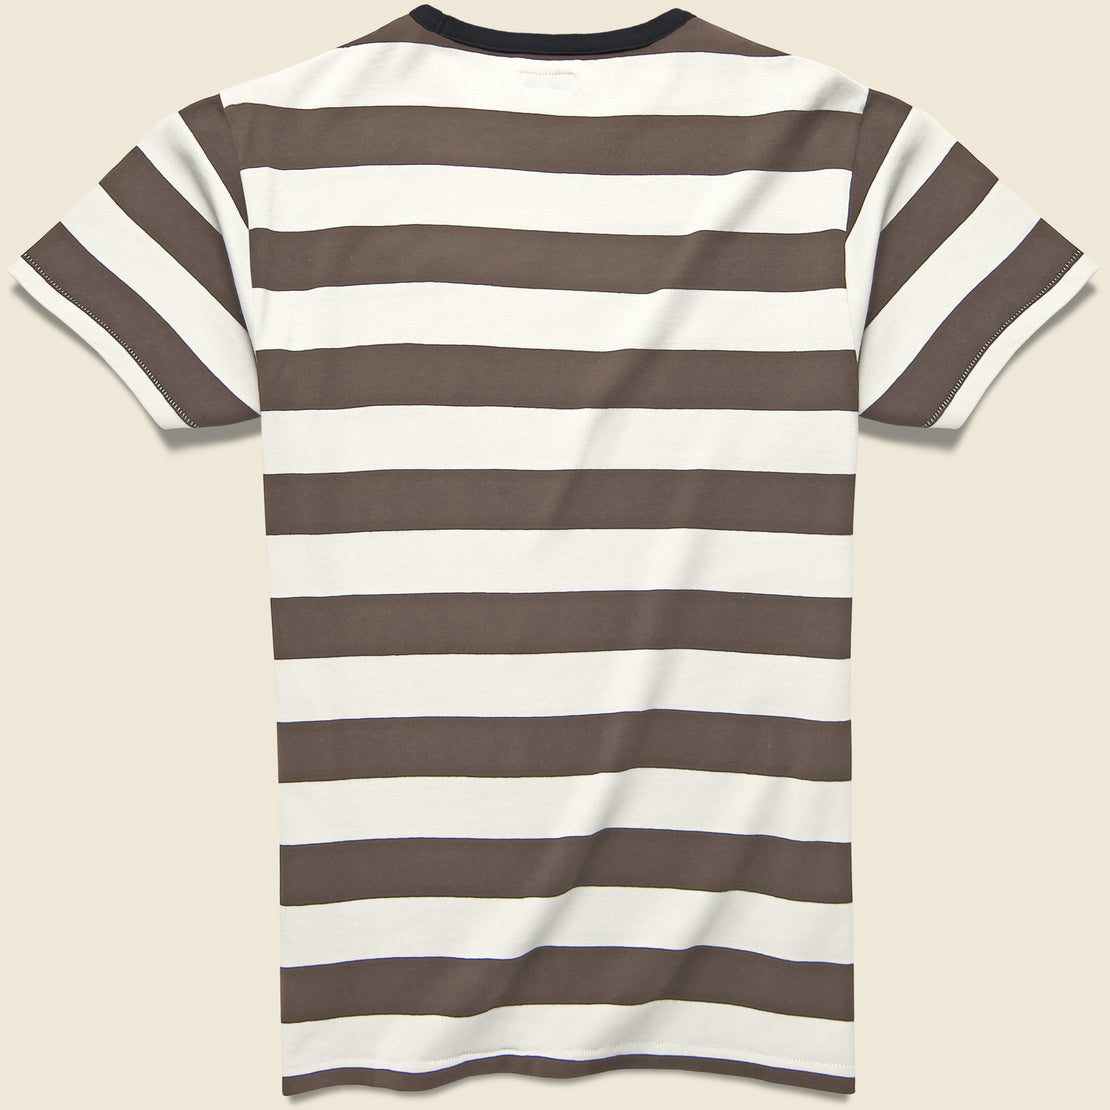 Mojave Striped Tee - White/Brown - Knickerbocker - STAG Provisions - Tops - S/S Tee